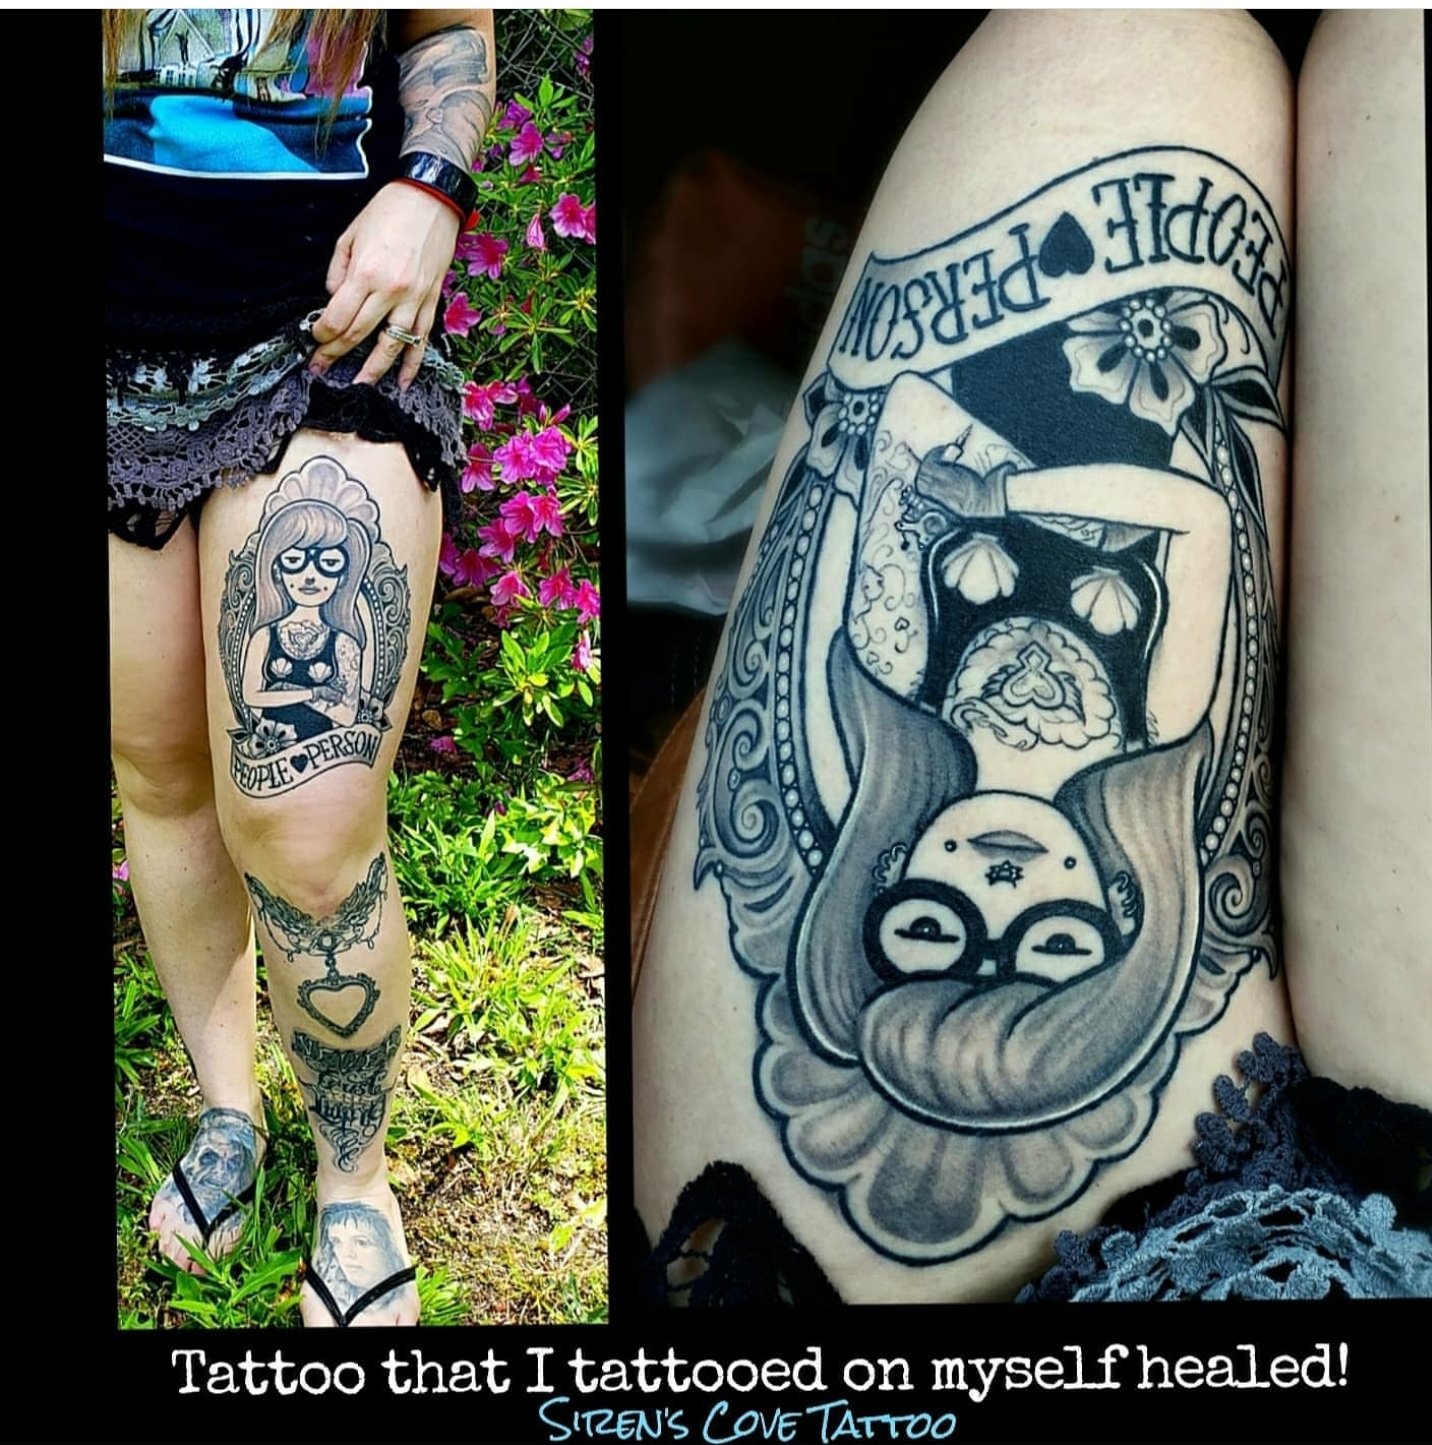 Tattoo Shops Near You in Greenville  Book a Tattoo Appointment in  Greenville SC